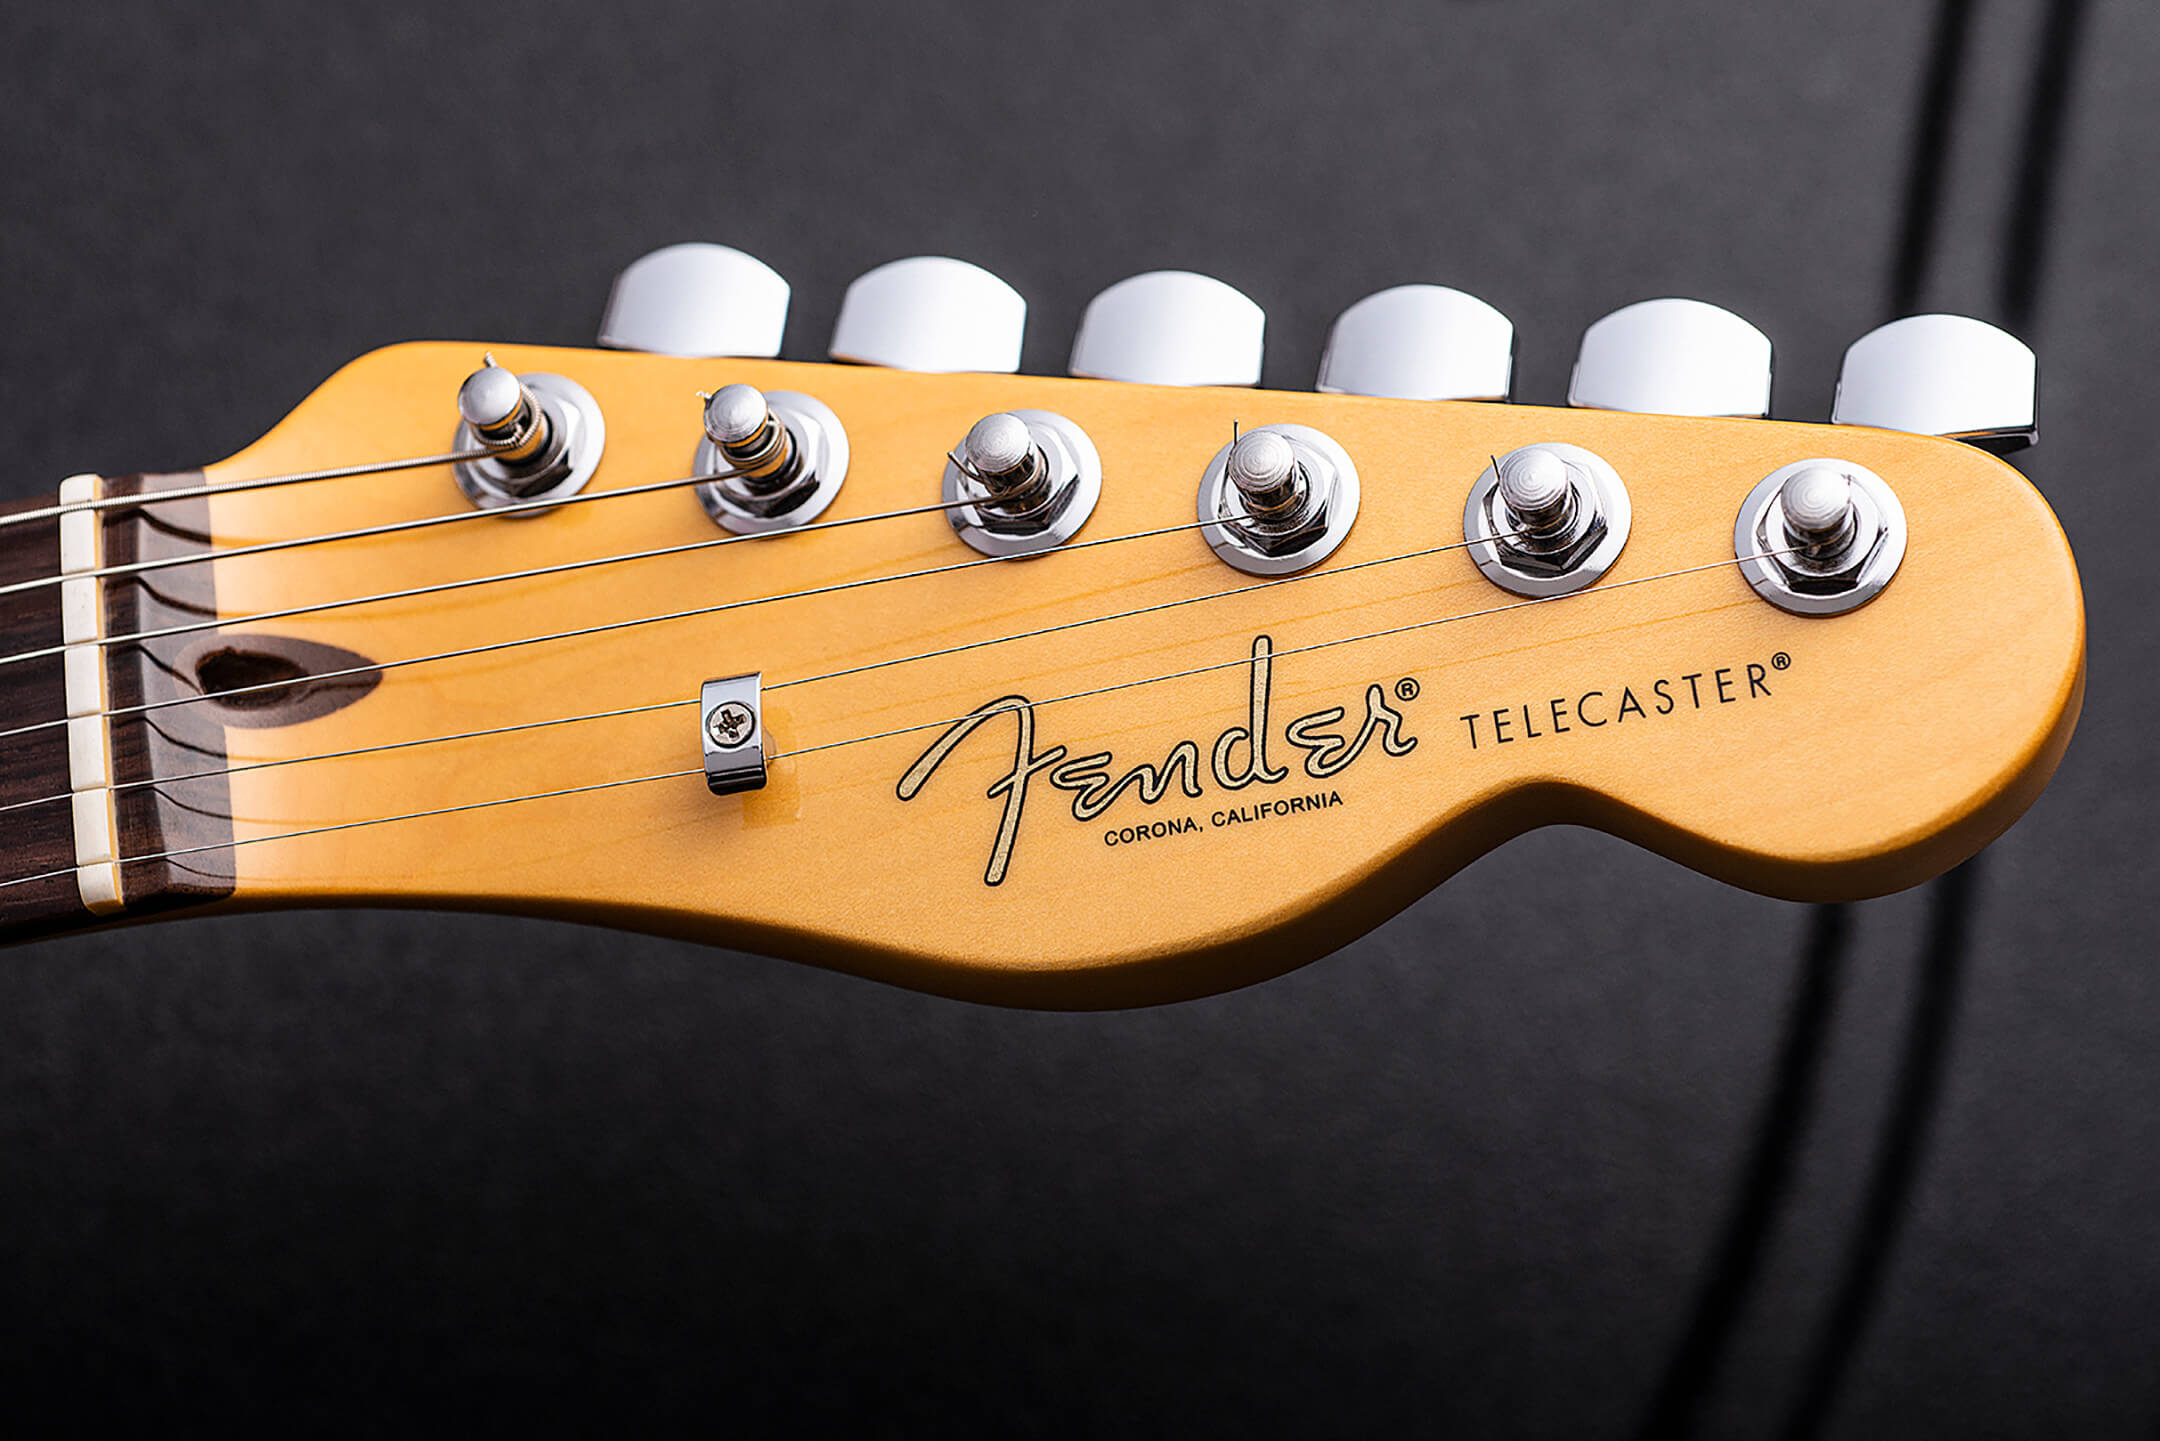 Fender American Professional II Stratocaster & Telecaster